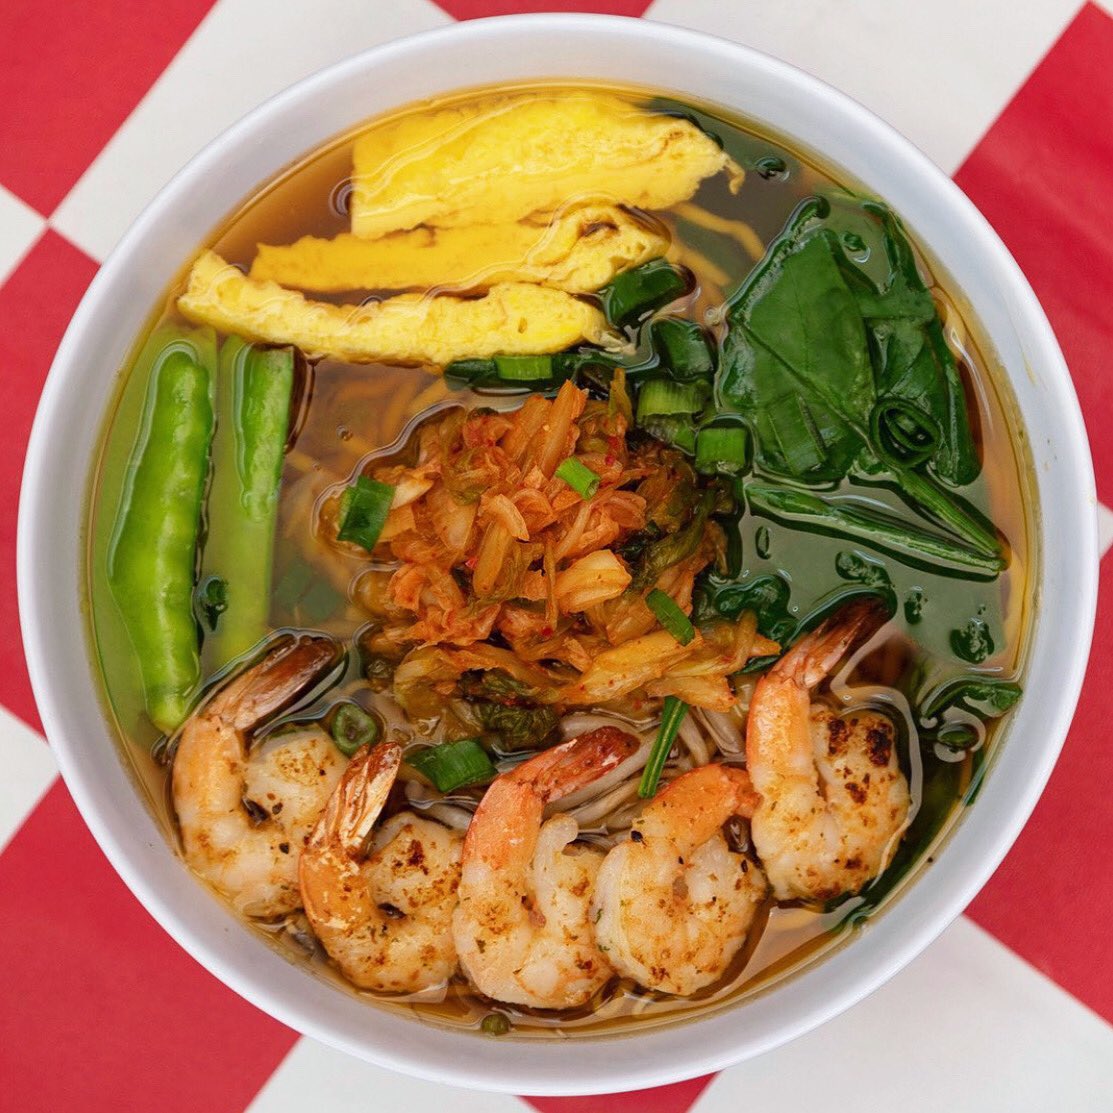 🍤Have you tried the Garlic Shrimp Ramen from Big City Diner? This big bowl is topped with egg, kimchee, bean sprouts, spinach and green onion! 🍜 @BigCityDiner